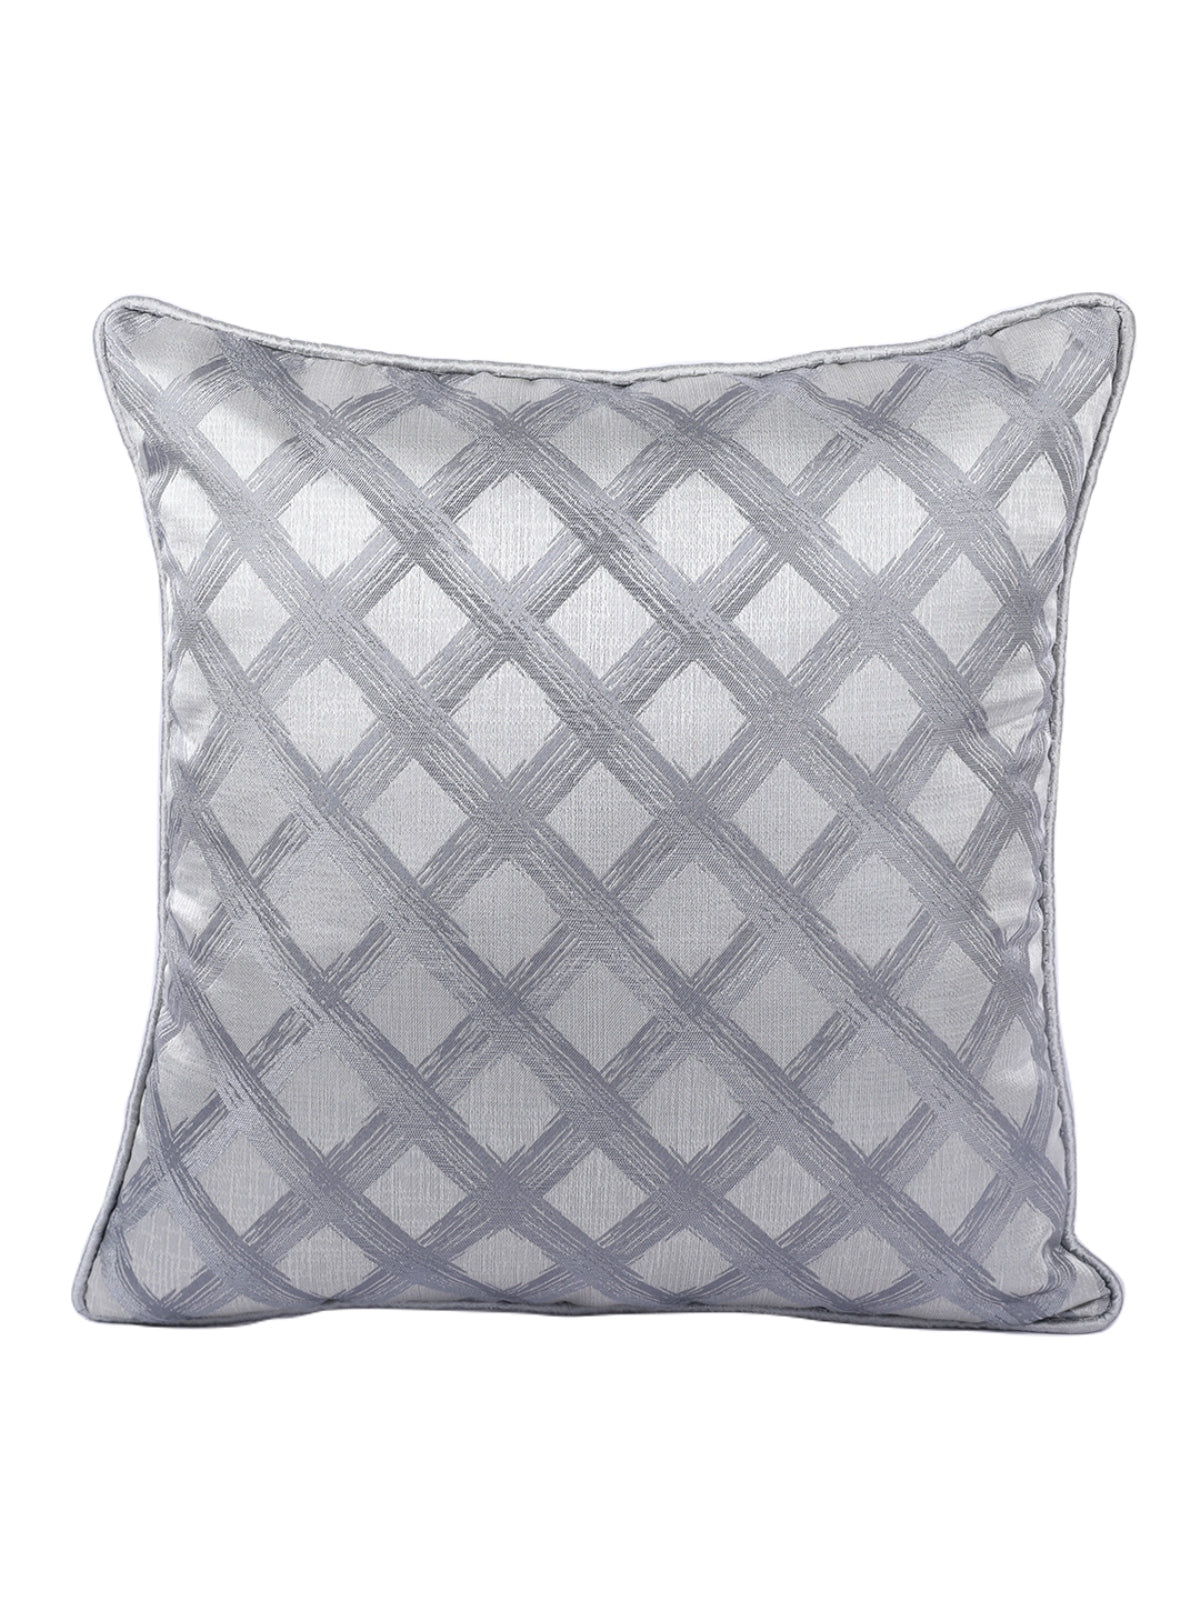 Silver Set of 5 Jacquard 16 Inch x 16 Inch Cushion Covers